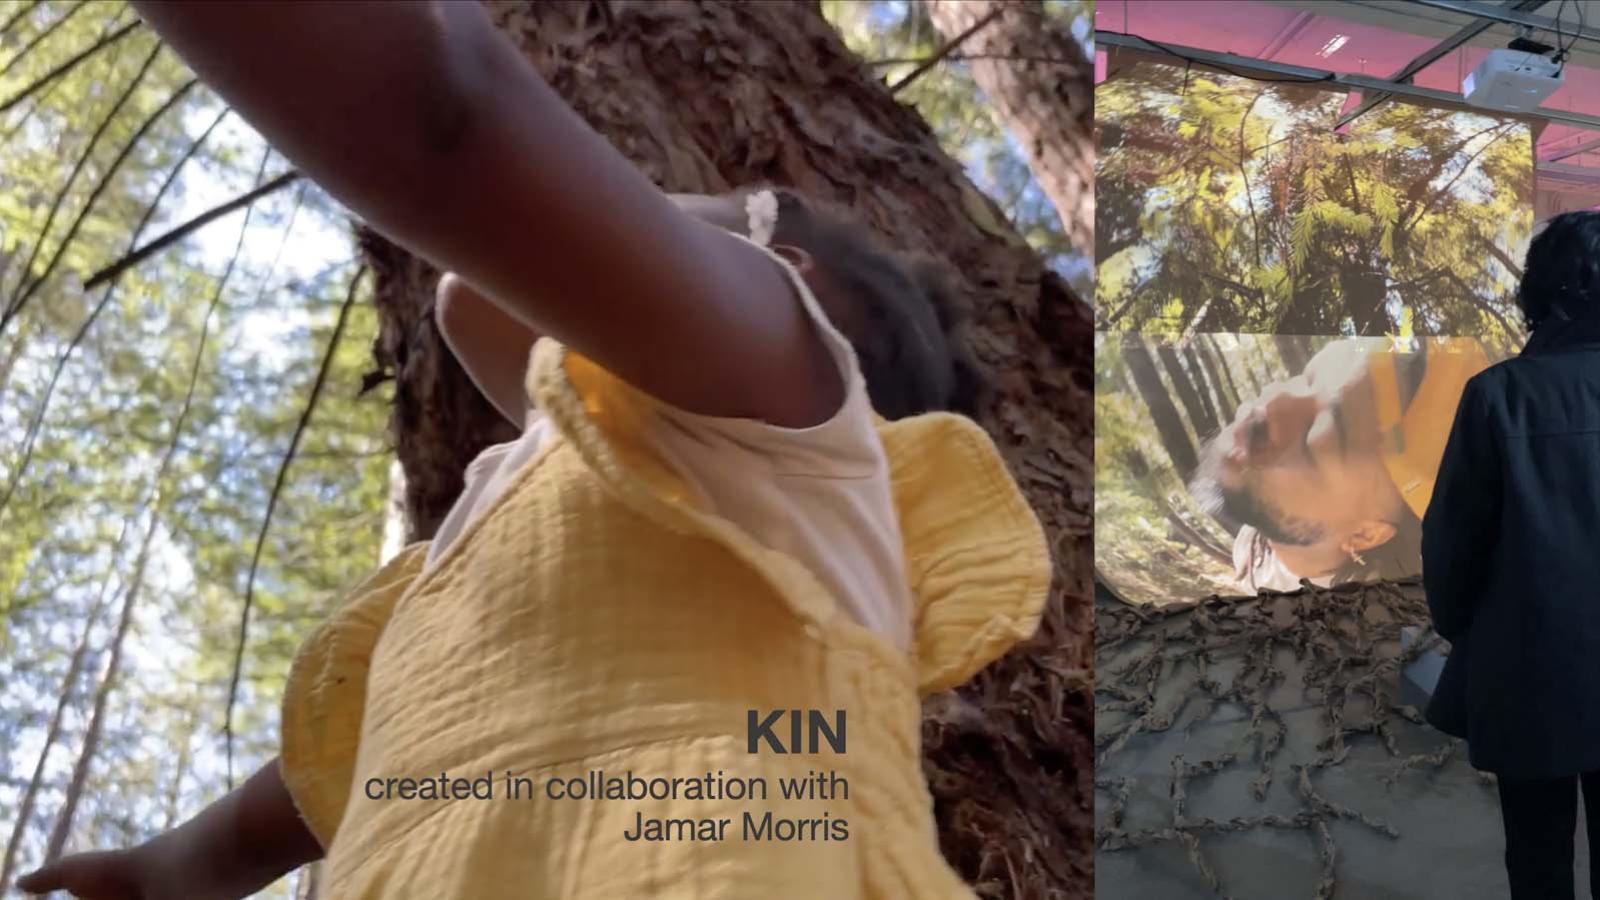 A view from underneath of a black person wearing a light yellow dress in a forrest